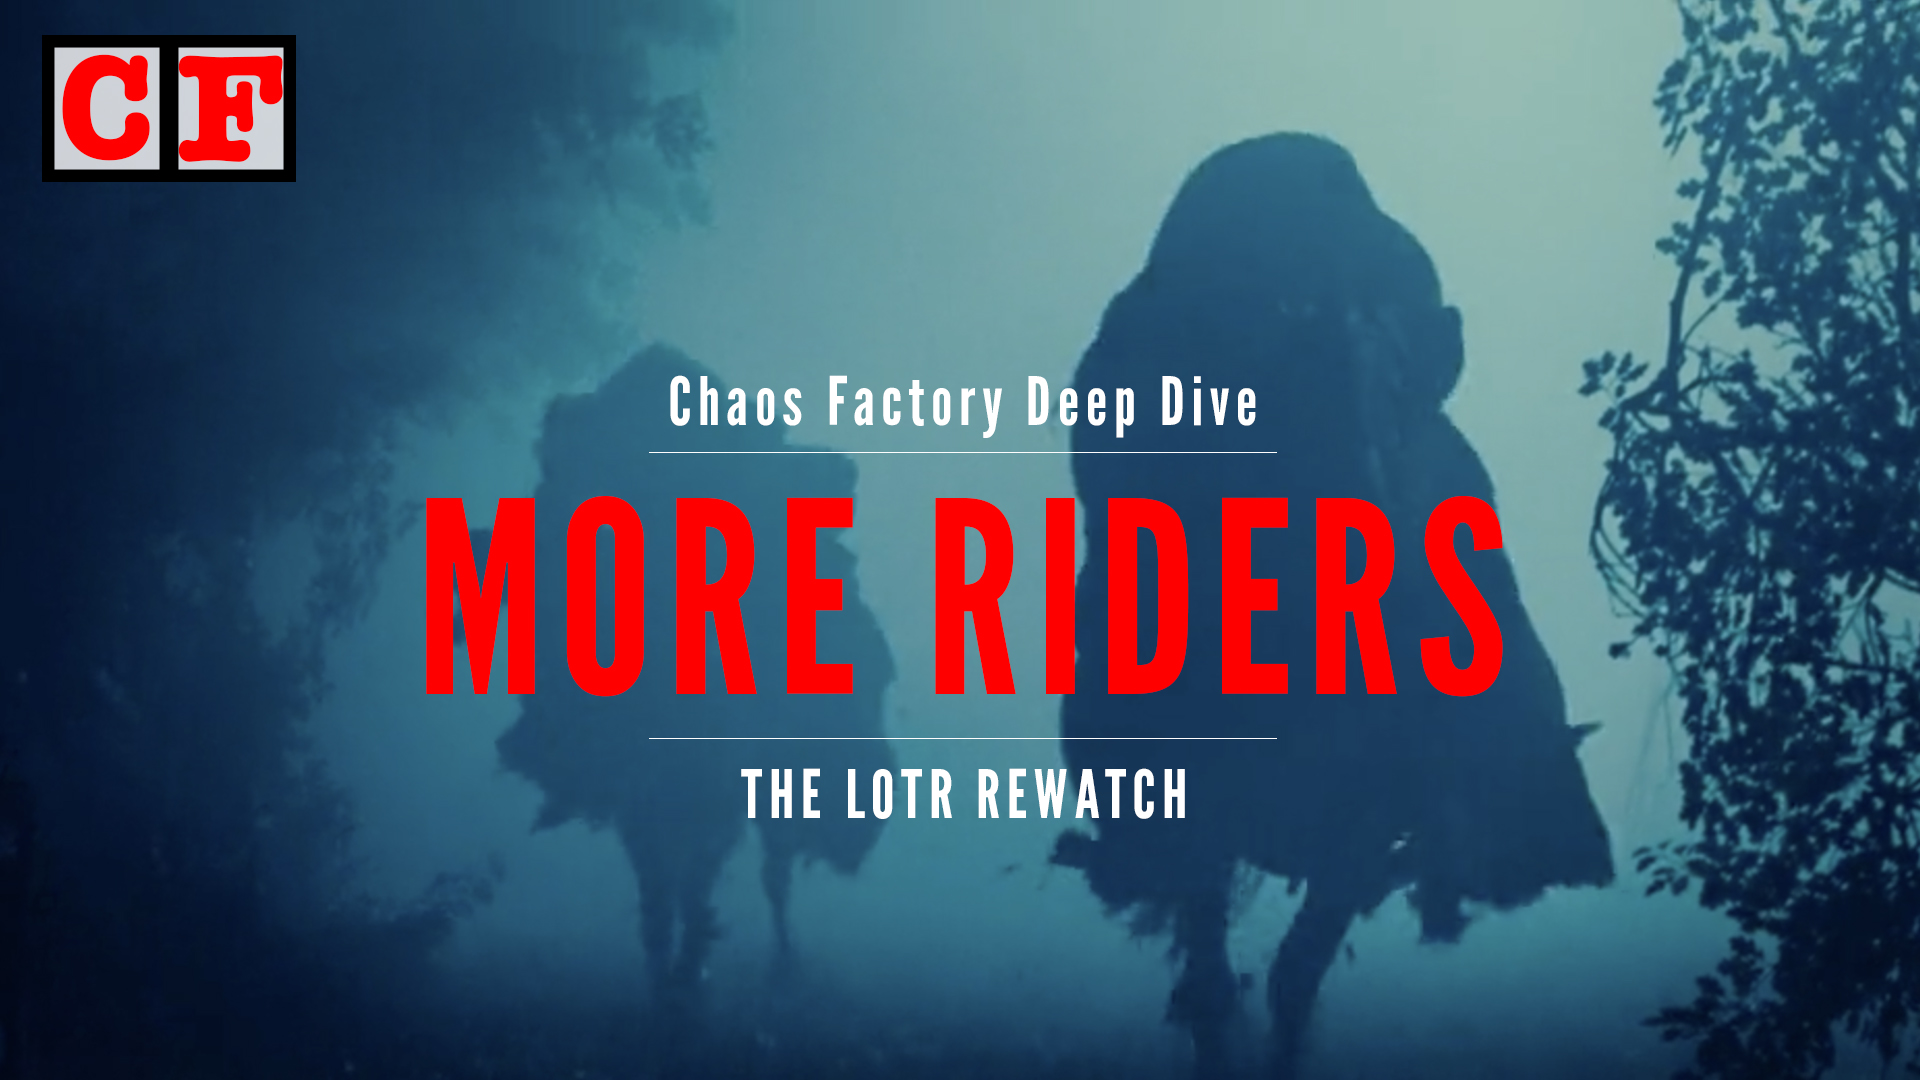 The Black Riders Lord Of The Rings